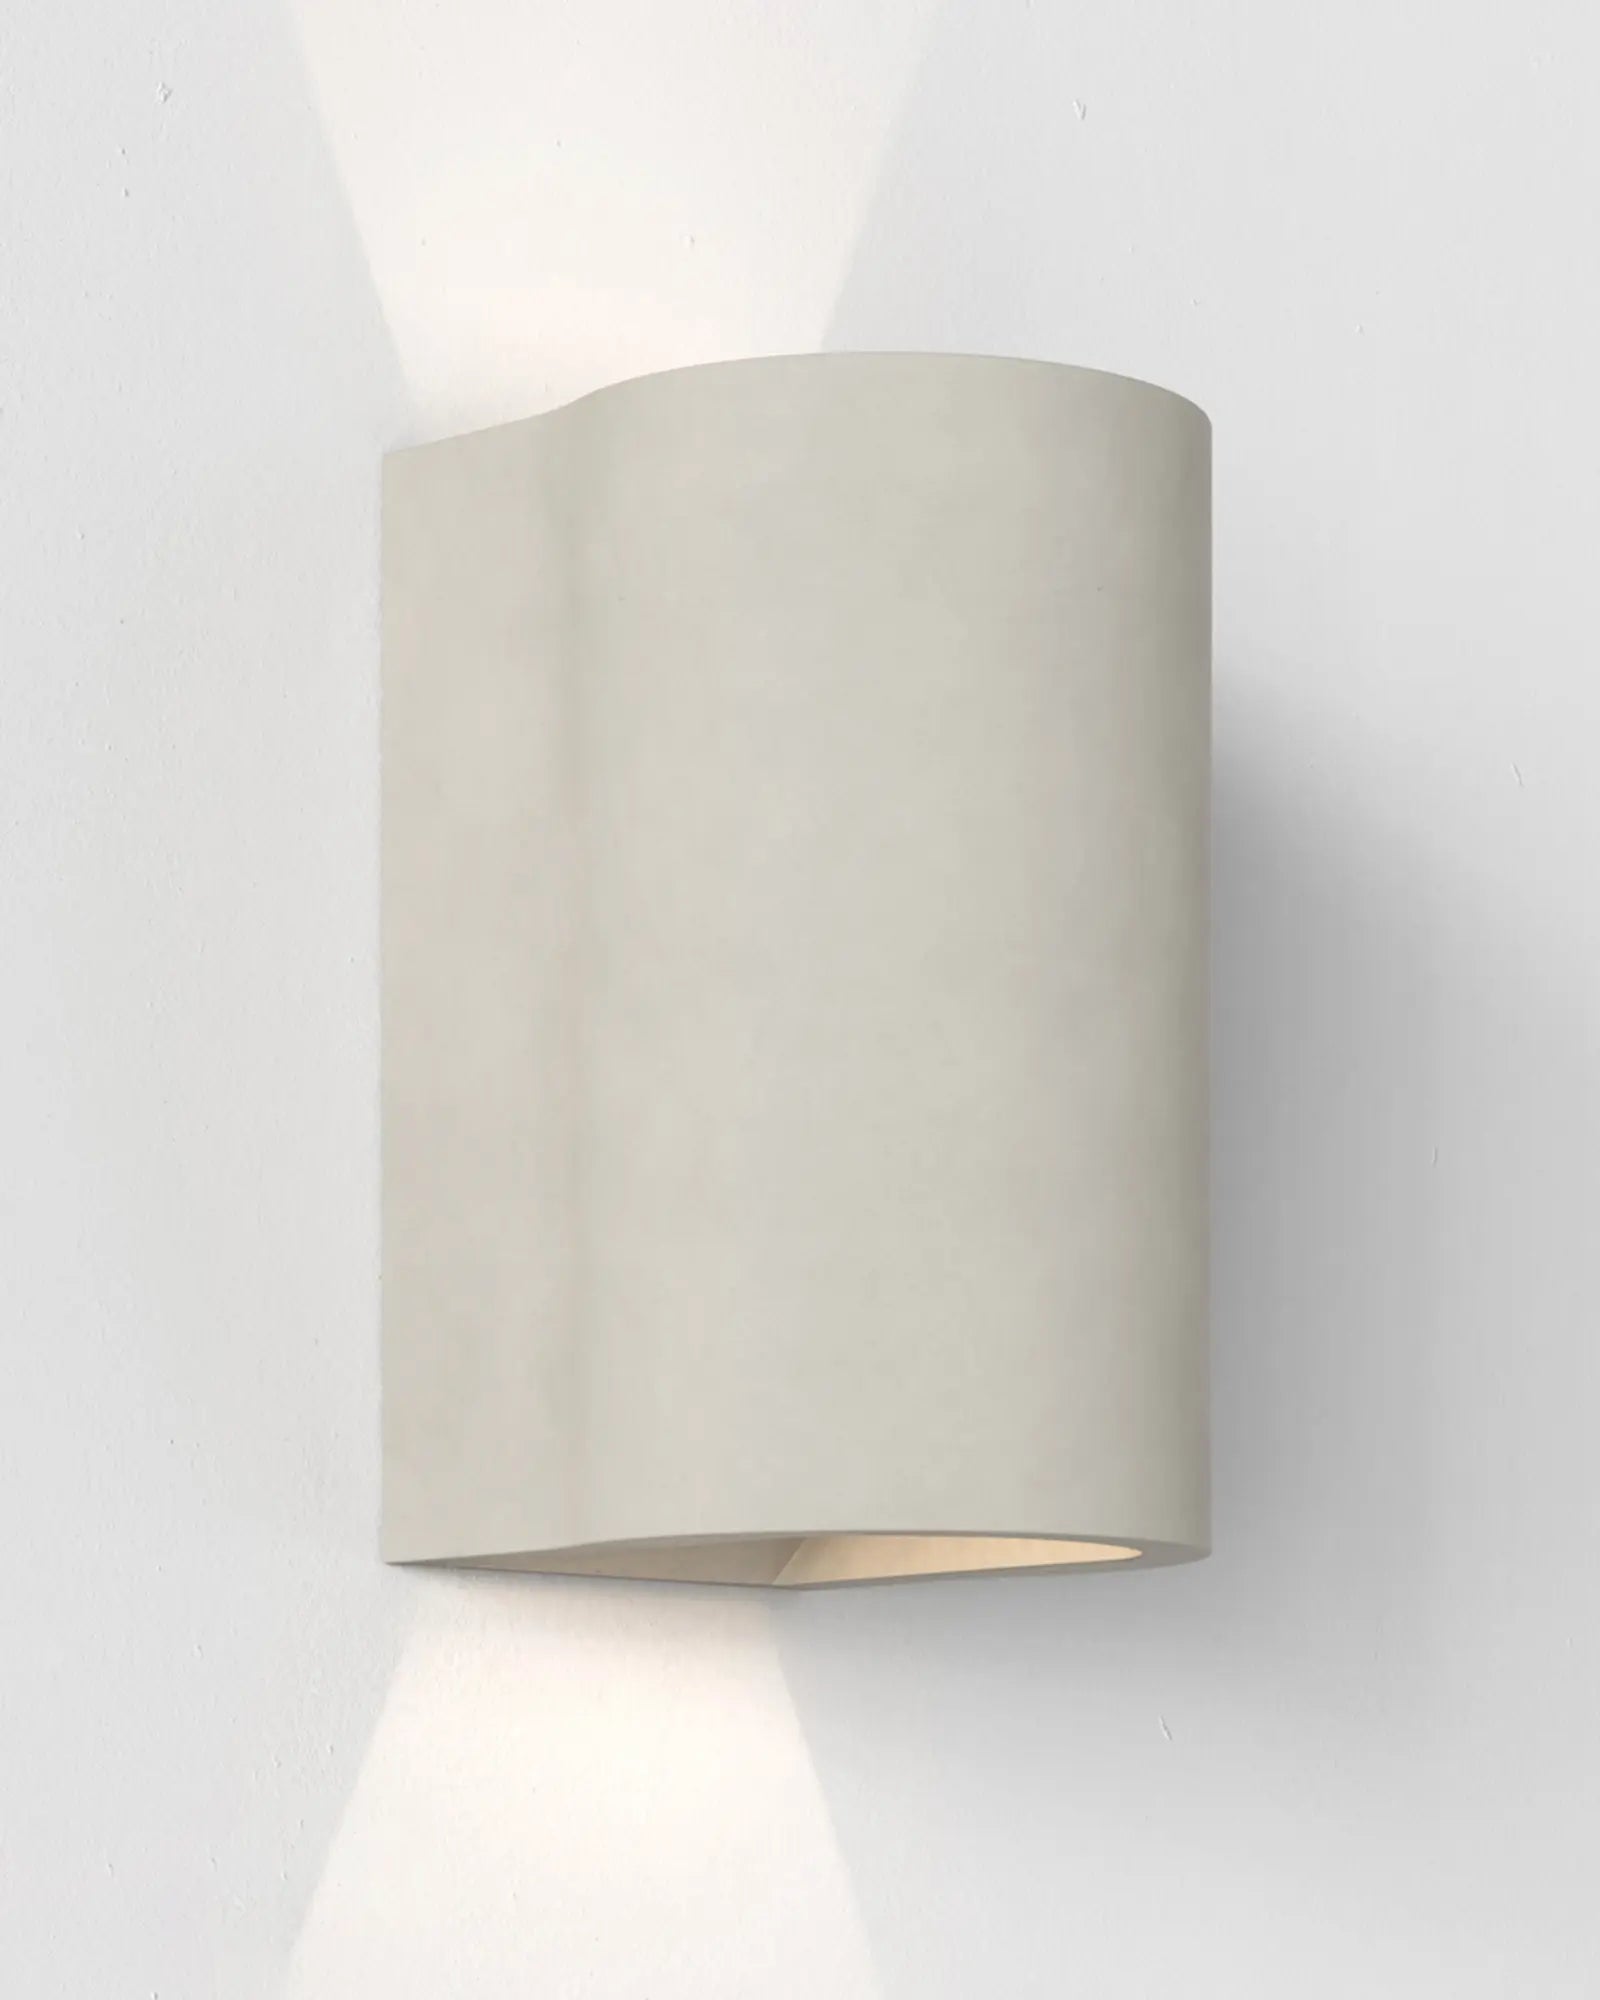 Dunbar Concrete minimalistic outdoor wall light up and down large